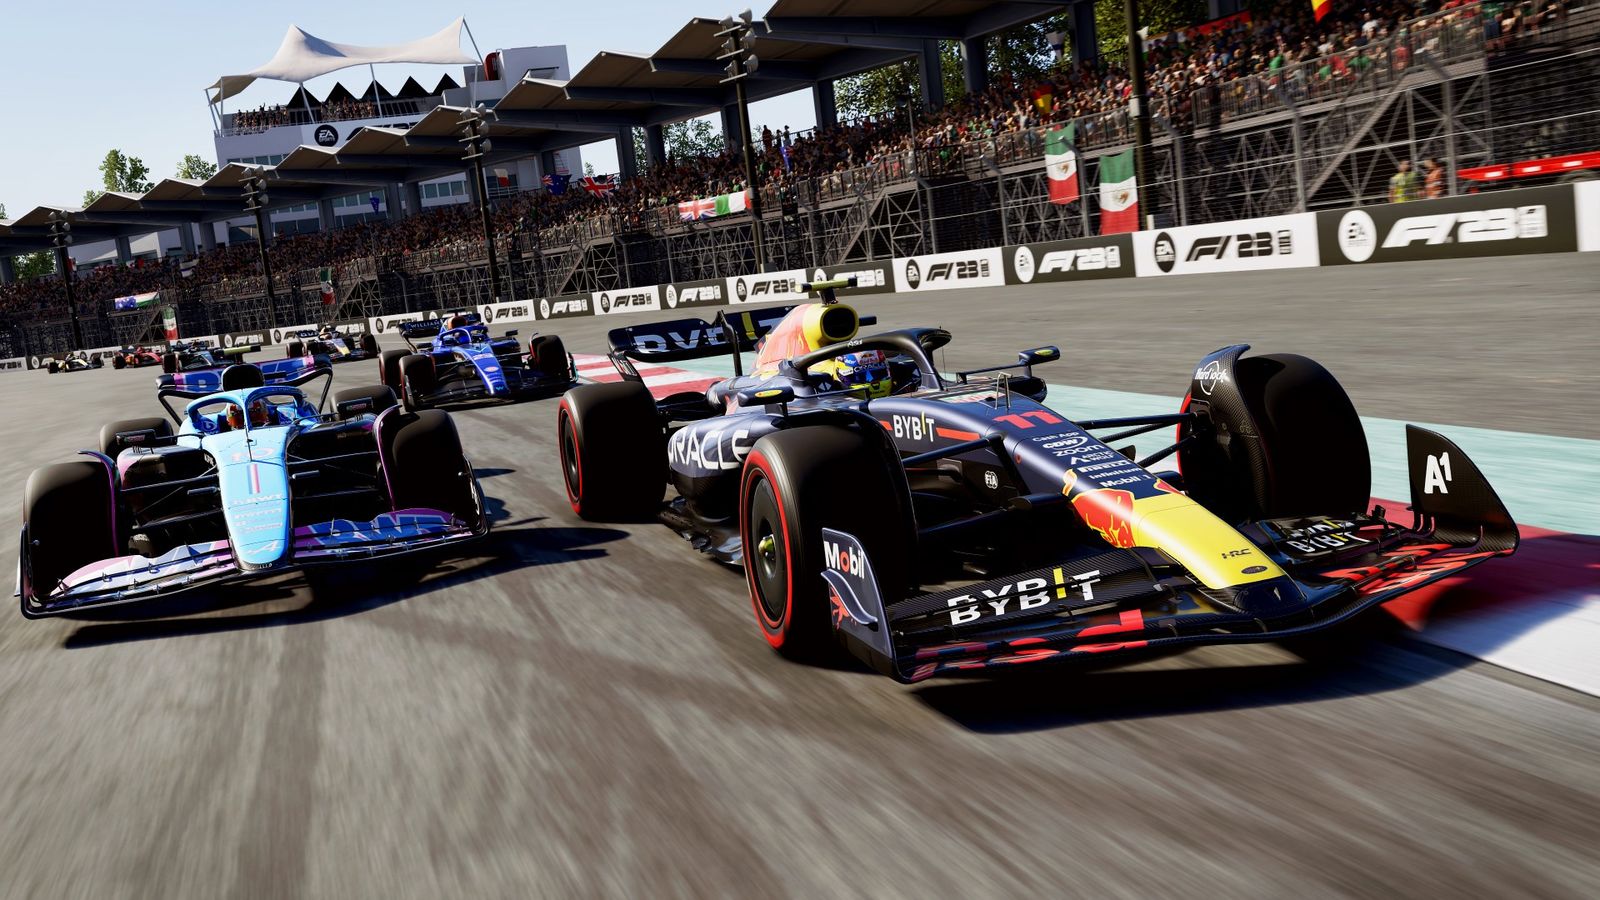 F1 23 available now on Game Pass